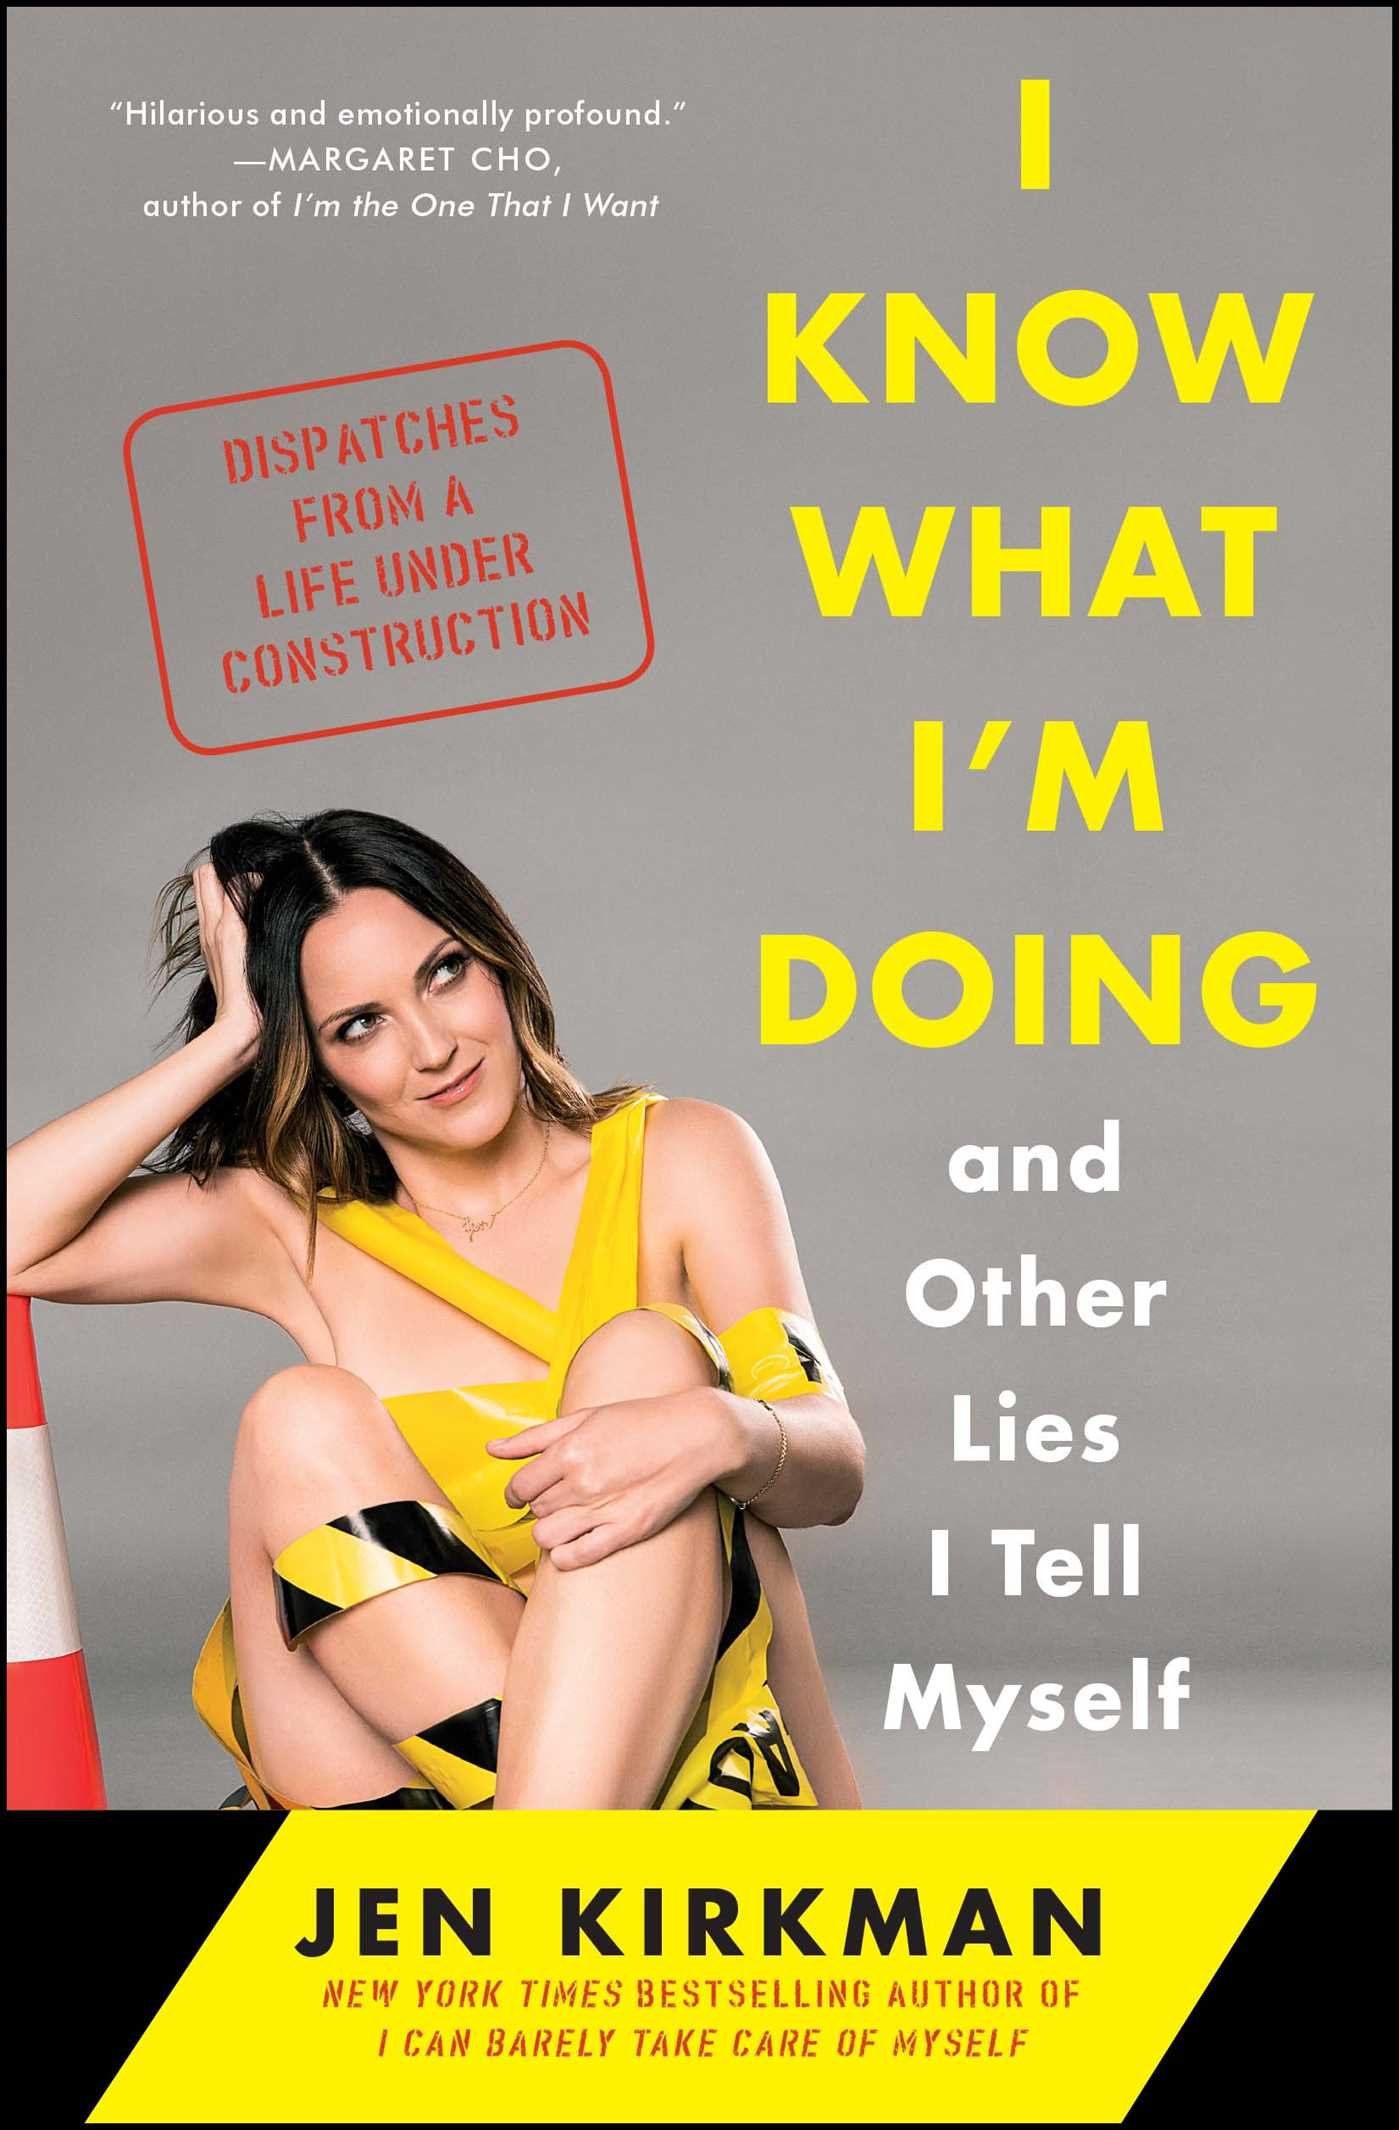 3. ‘I Know What I’m Doing’ by Jen Kirkman